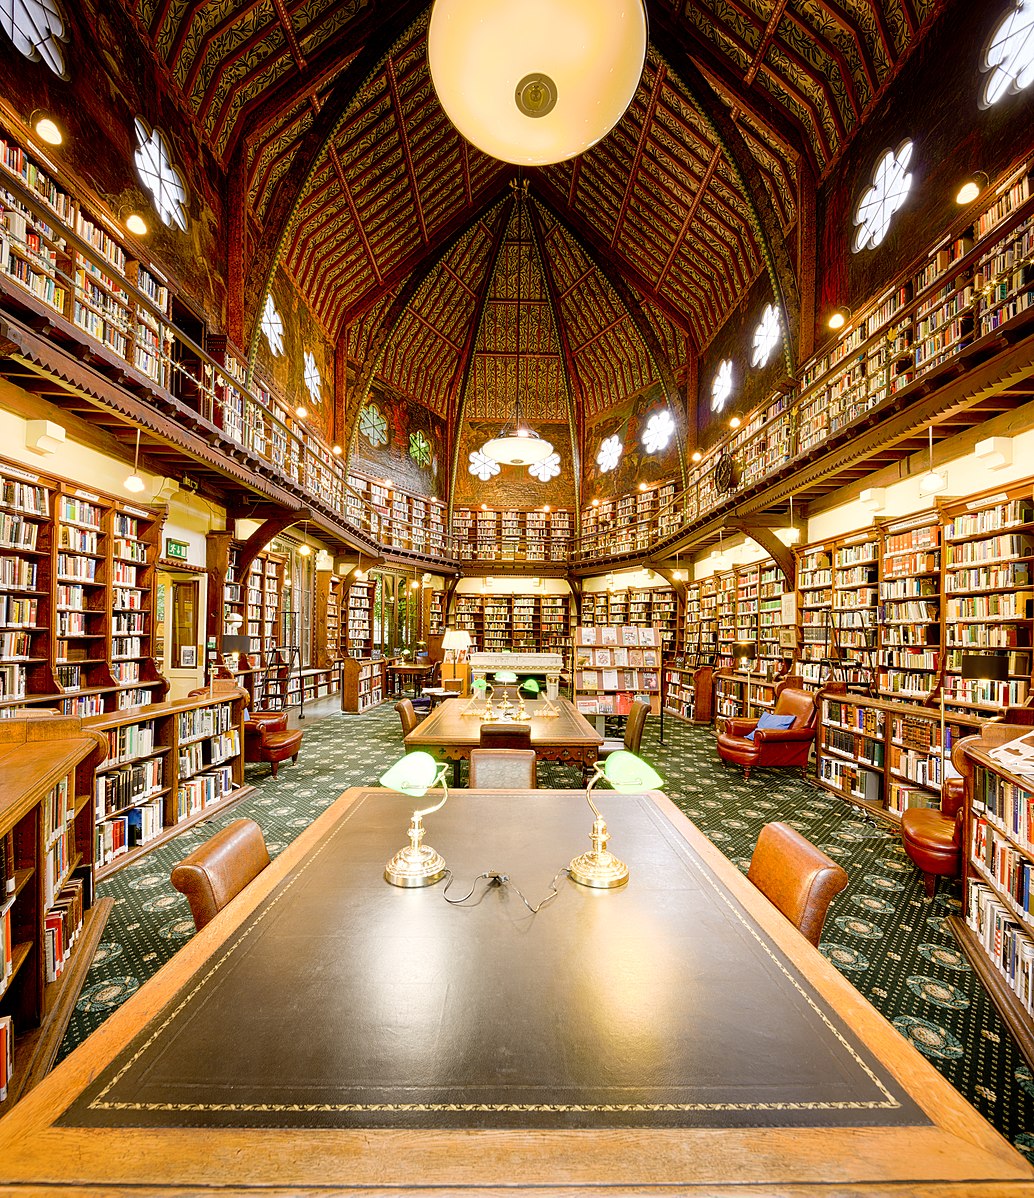 The Oxford Union Society: A Hub of Intellectual Discourse and Debate